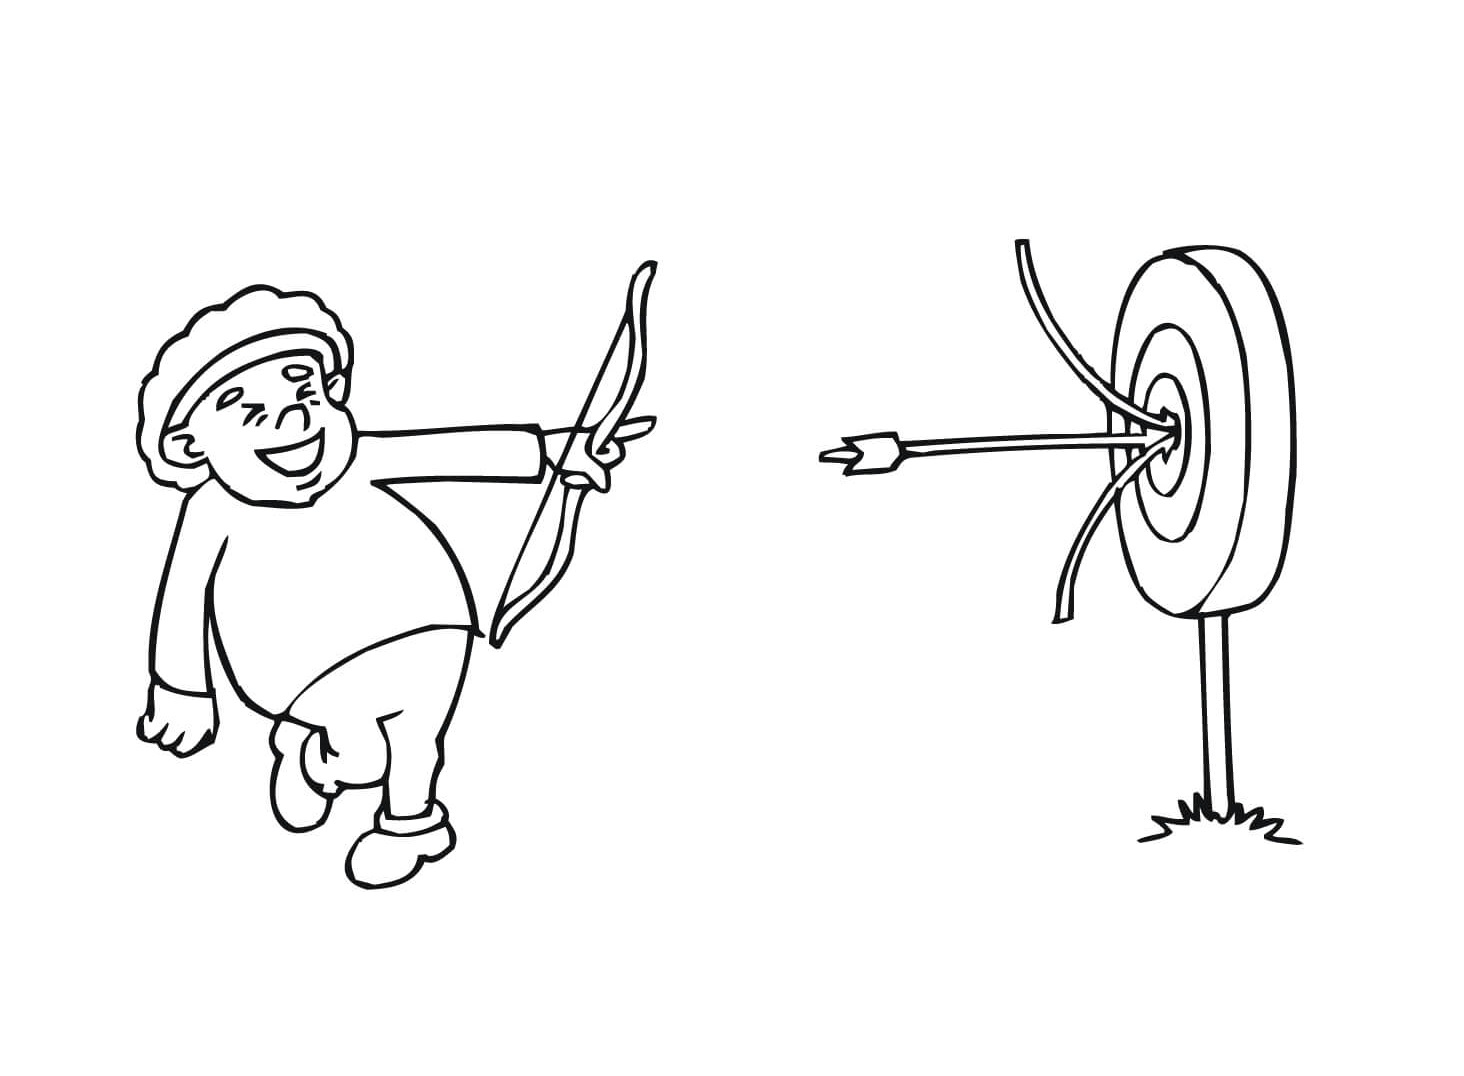 The Boy Shooting The Arrow Coloring Page - Free Printable Coloring